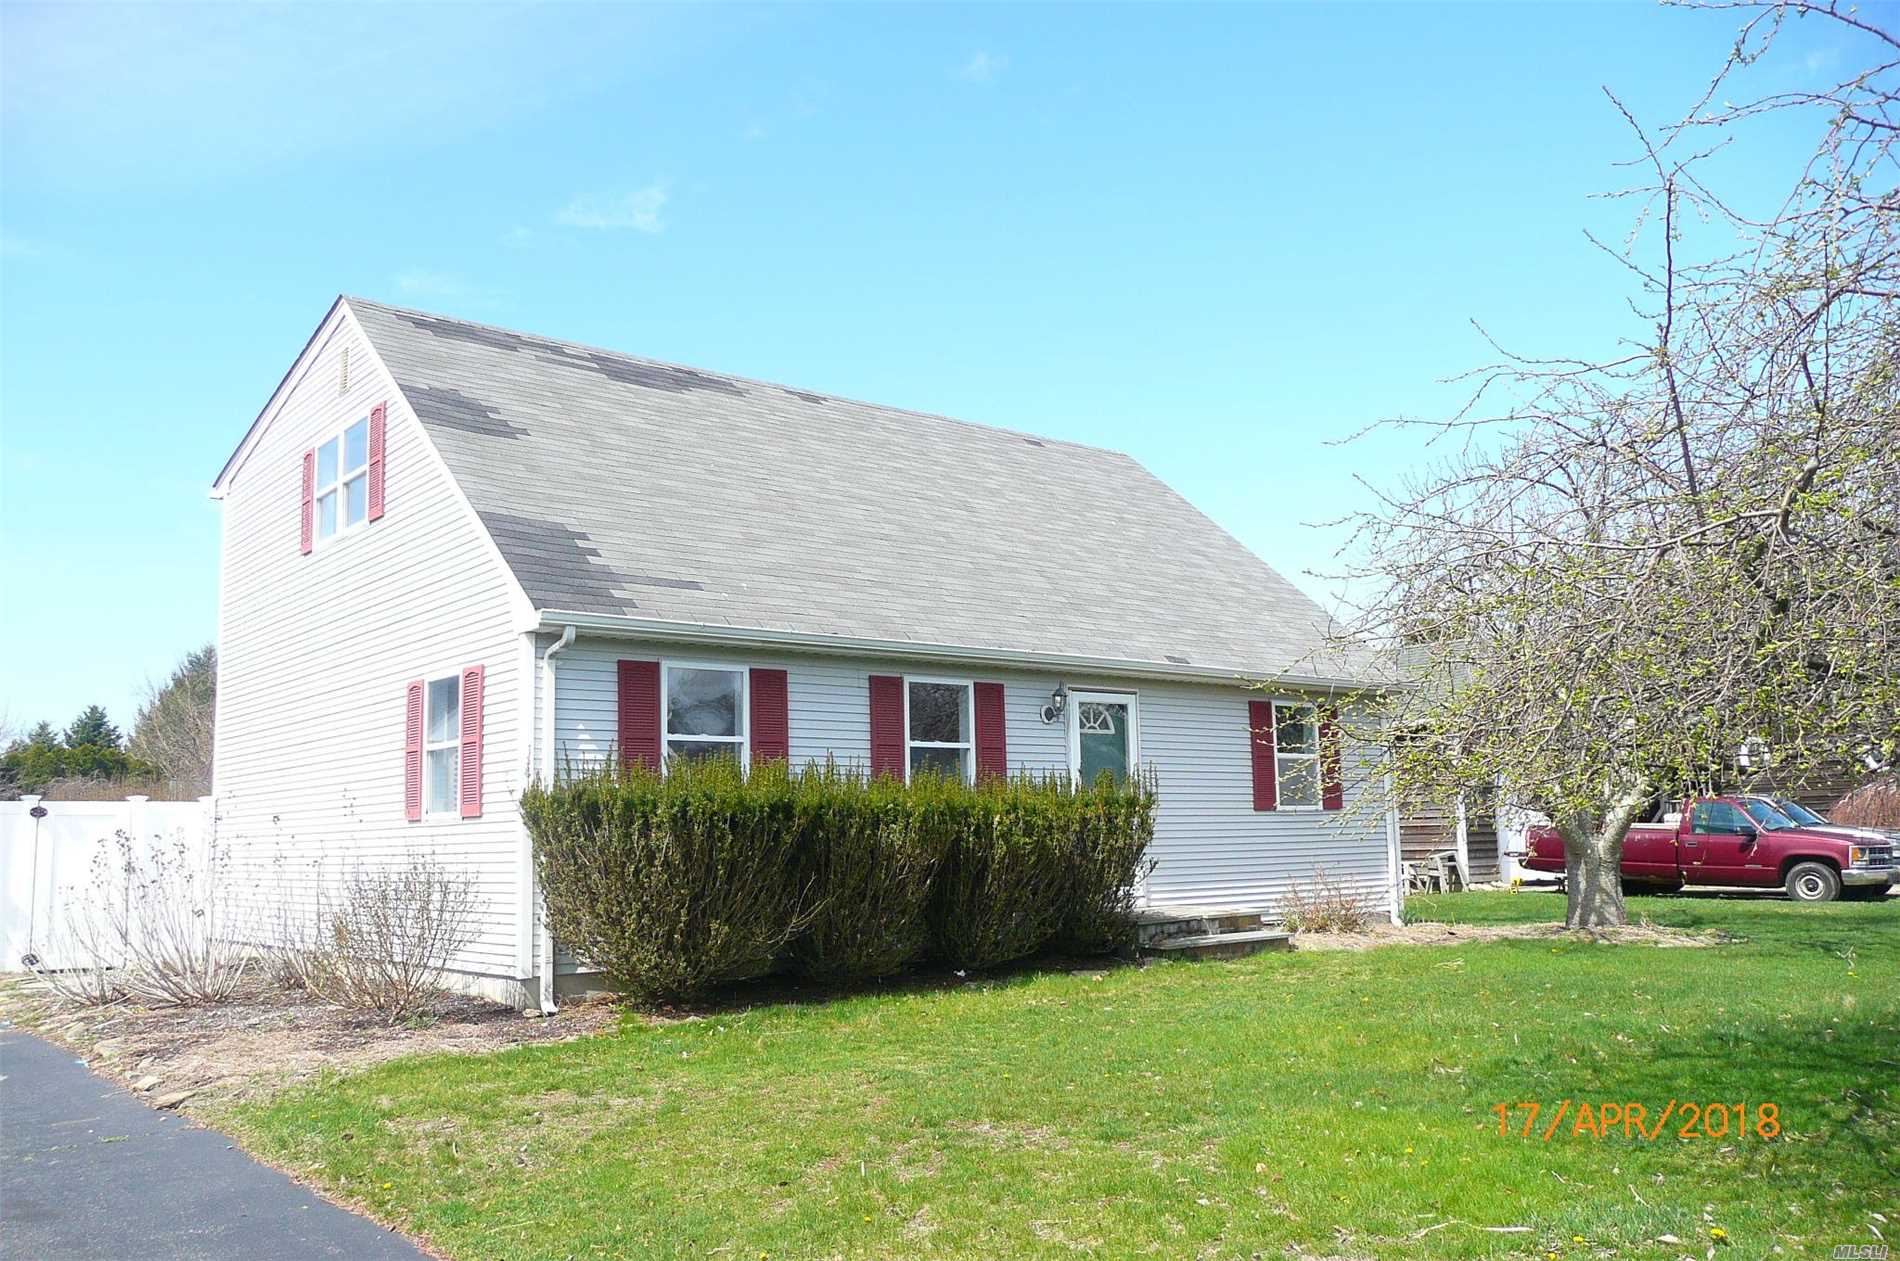 Classic 4 Br, 2 Bath Cape In Great Southold Neighborhood. Features A Detached 2 Car Garage, A Large Beautifully Landscaped Yard Complete With In Ground Pool, Gazebo, Fire Pit And Large Shed For Storage. Great Fixer-Upper! Close To Southold Town Beach And Greenport Village.